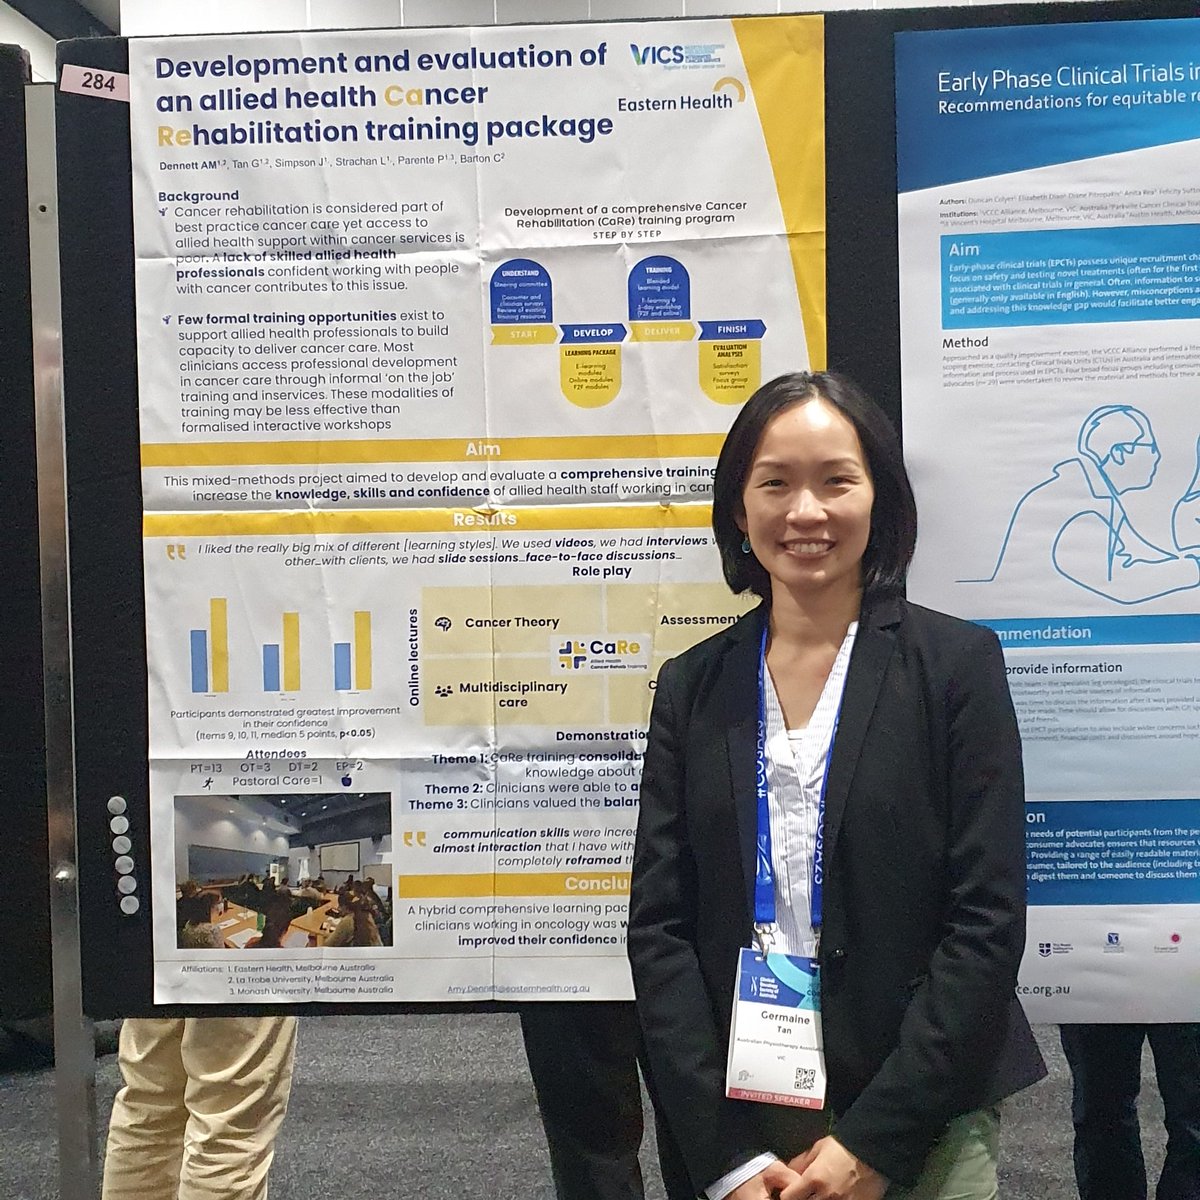 Many allied health professionals lack confidence to work with people with cancer. Thanks to @NEMICS1 @EH_Research, we developed a blended learning #cancerrehab training package to ⬆️ knowledge, skills and confidence. Poster #284 @COSAoncology#COSA@DrAmyDennett @DrChrisBarton